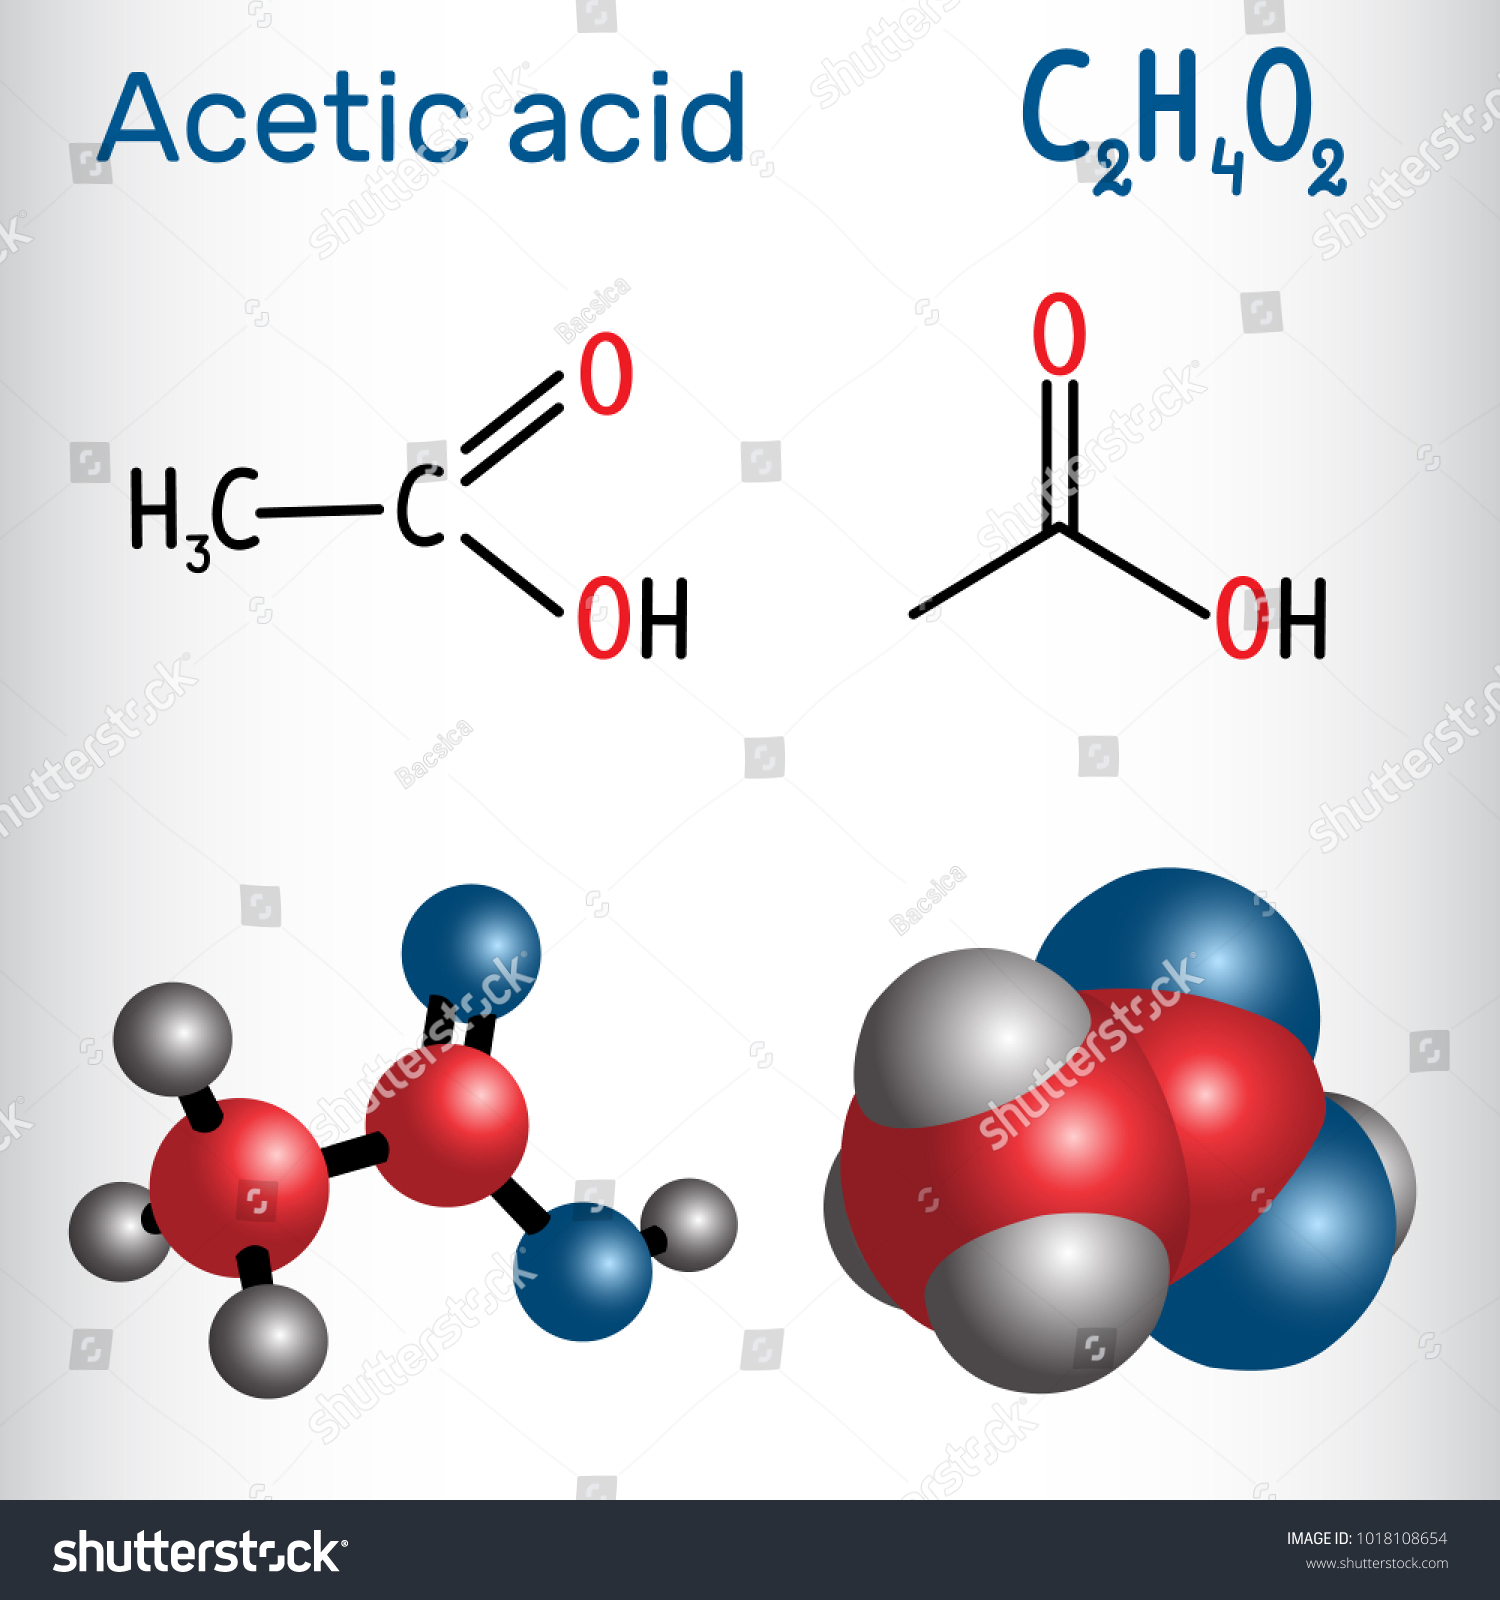 Acetic Acid Ethanoic Molecule Structural Chemical Stock Vector Royalty Free 1018108654